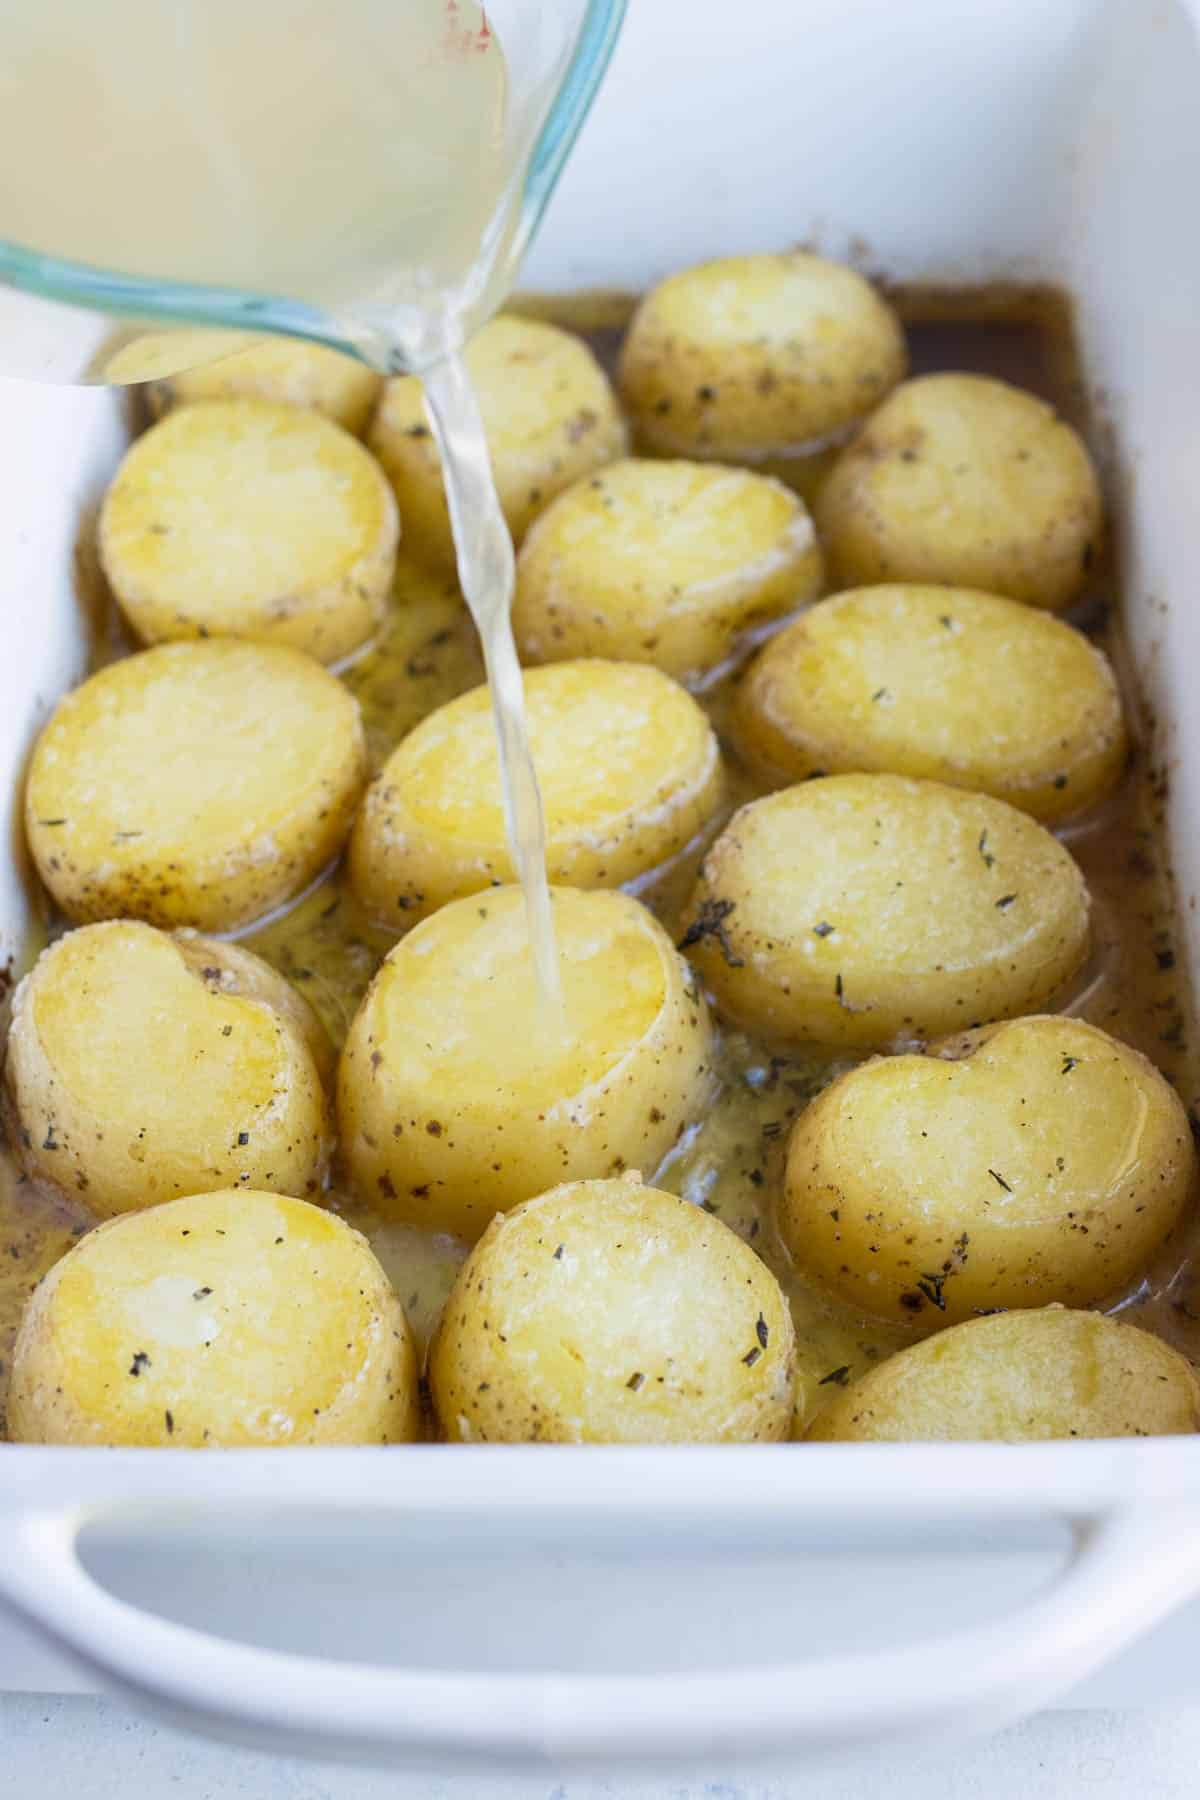 Broth is poured over partially baked potatoes.